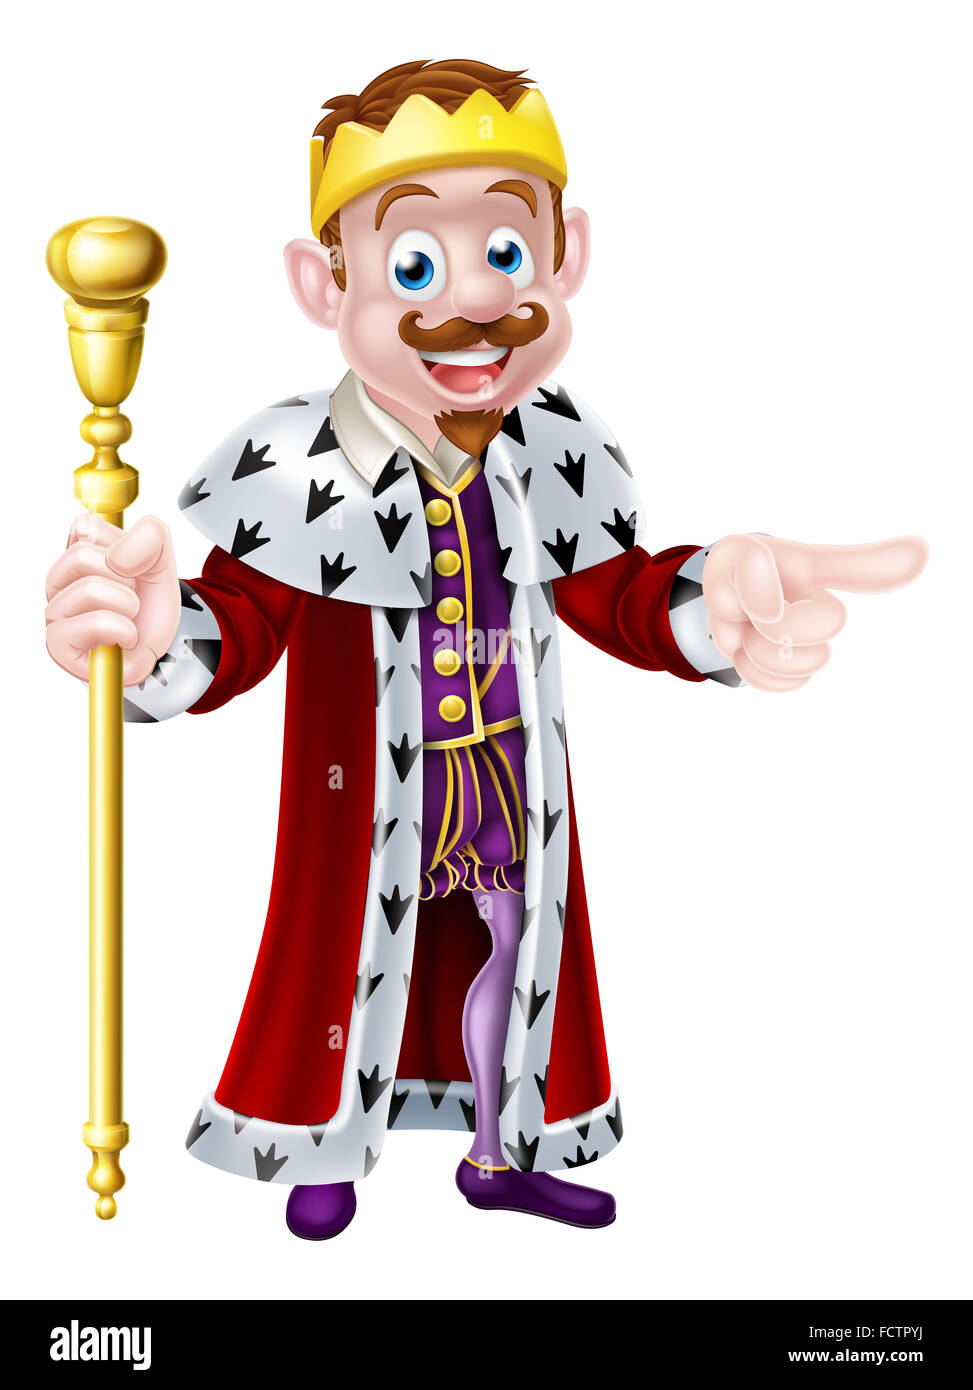 A cute king cartoon character holding a sceptre with one hand and pointing with the other Stock Photo